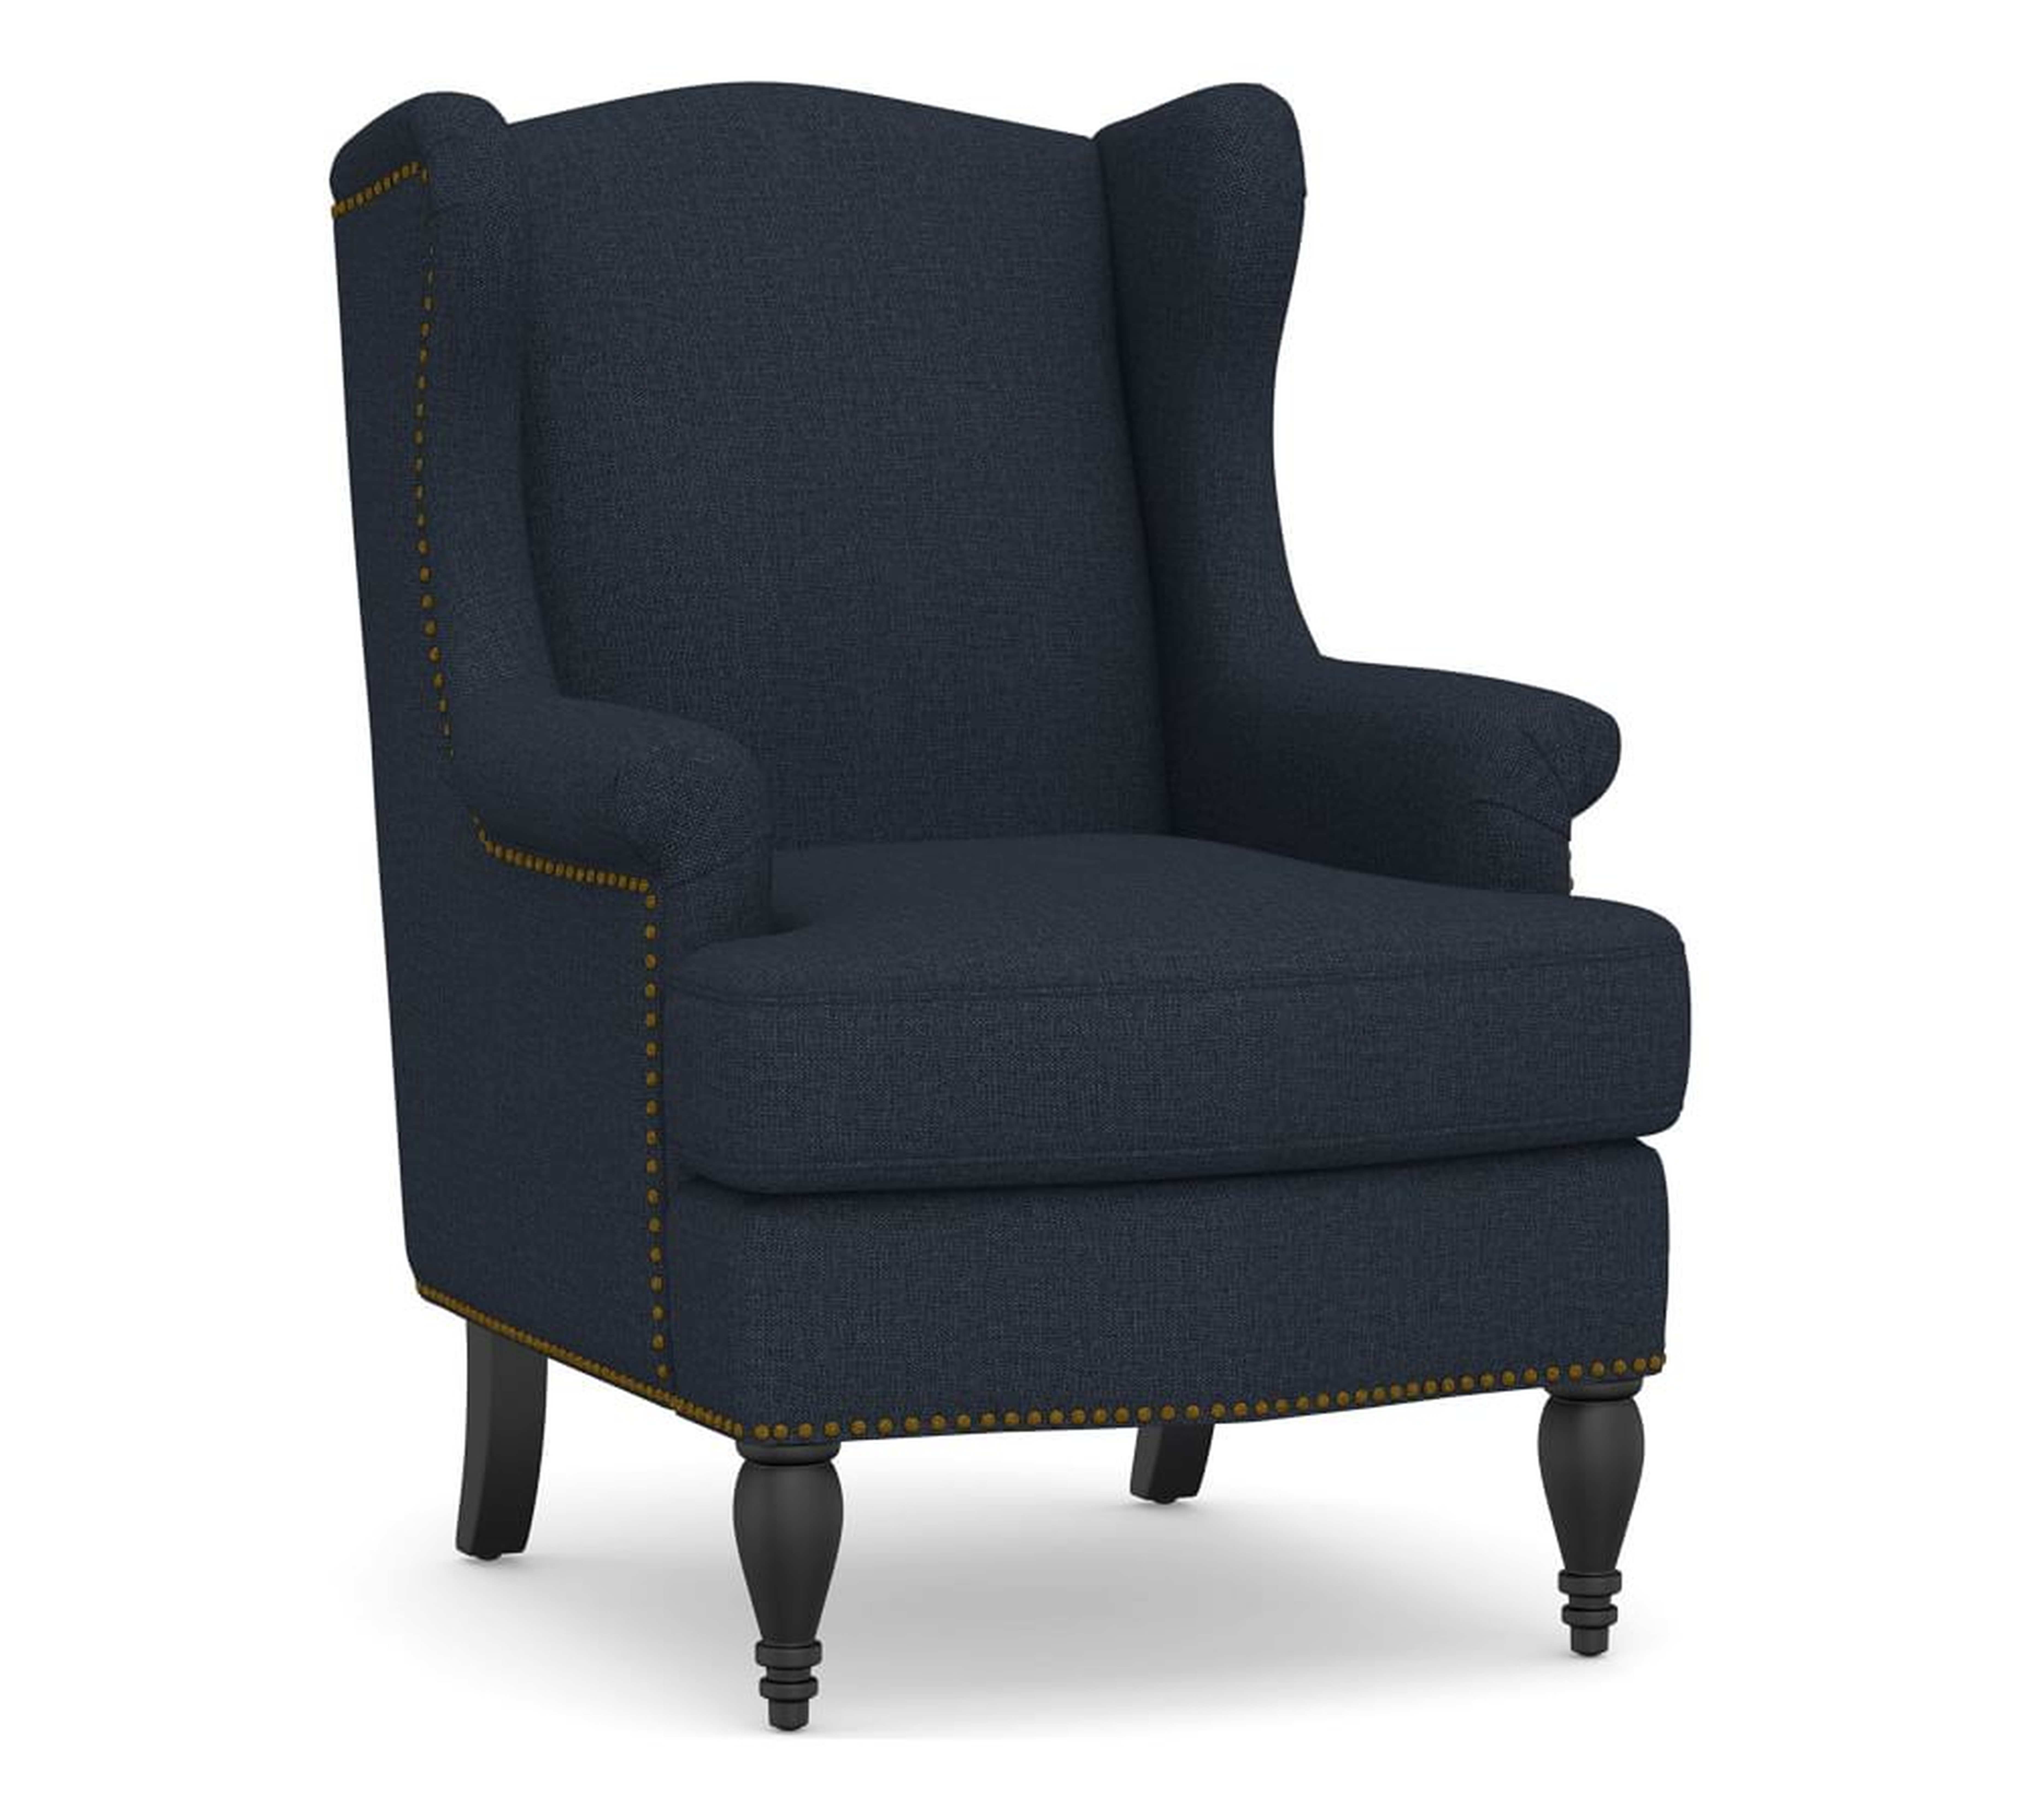 SoMa Delancey Upholstered Wingback Armchair, Polyester Wrapped Cushions, Performance Brushed Basketweave Indigo - Pottery Barn